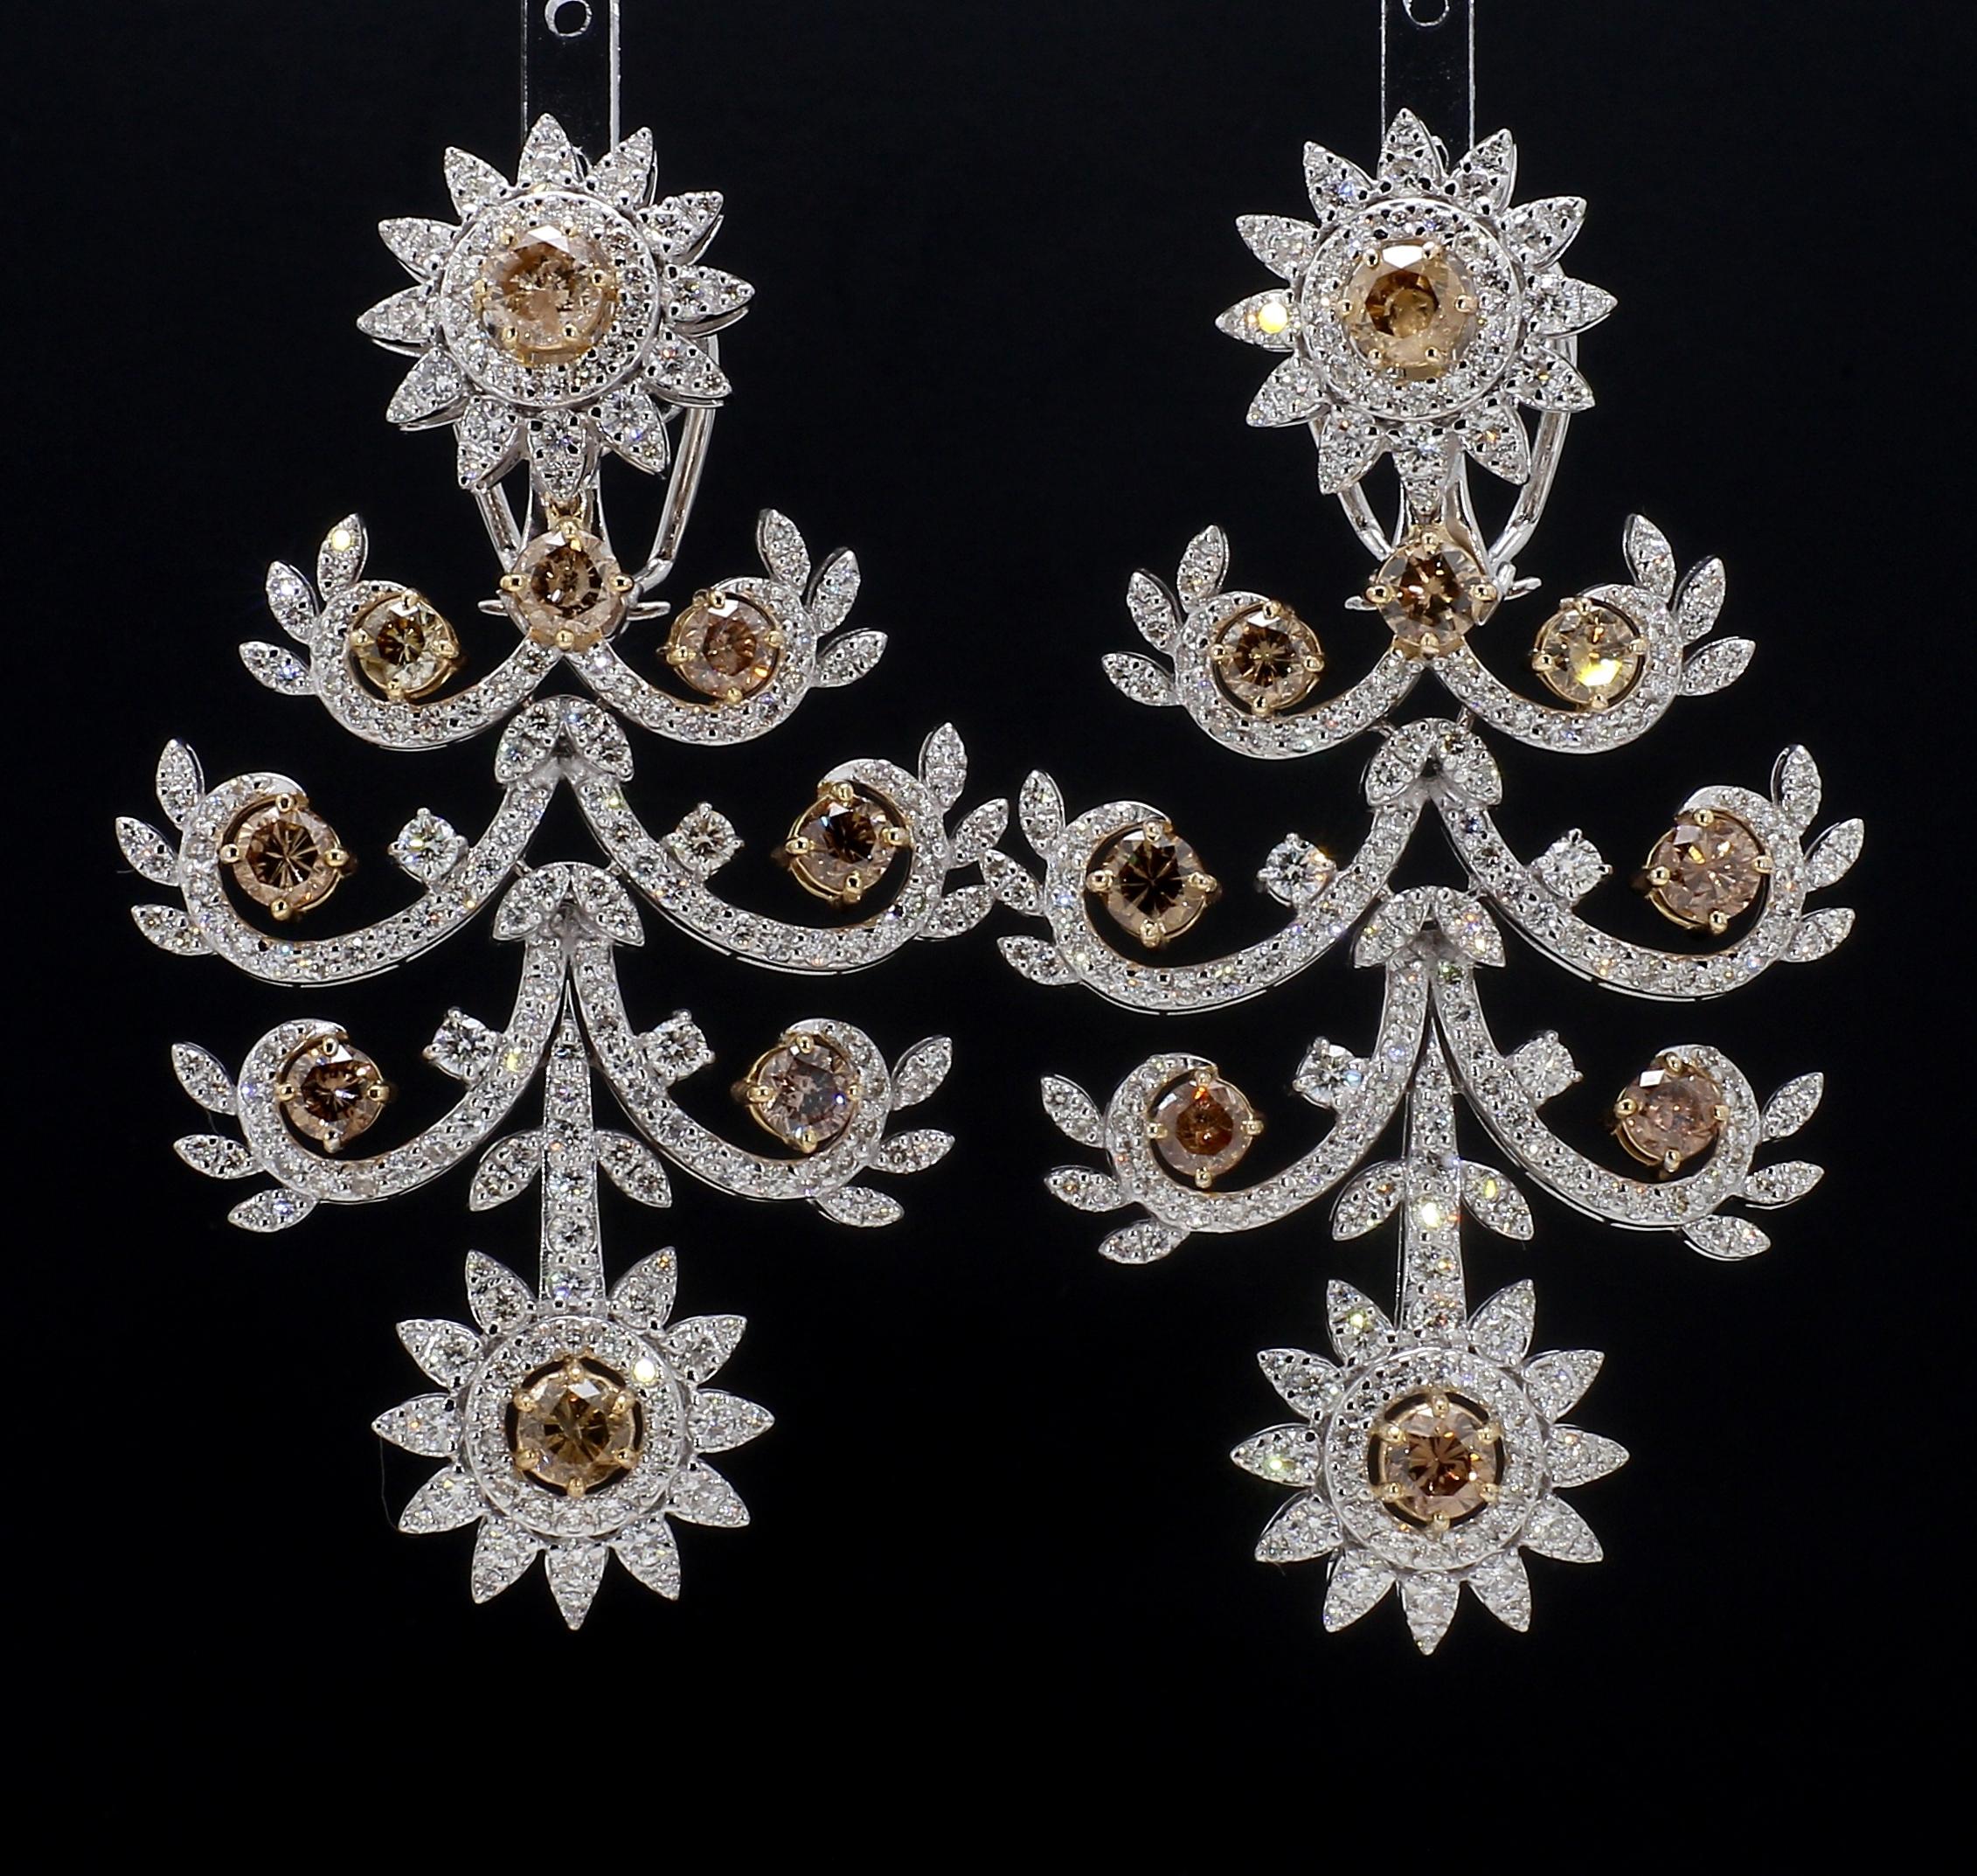 **All jewellery is one-of-a-kind**
**Hallmarked with diamond weight and gold purity**

Add some glamour to your look with these stunning Champagne Diamond Chandelier Earrings from Alternative Jewellery. These earrings feature a unique design with